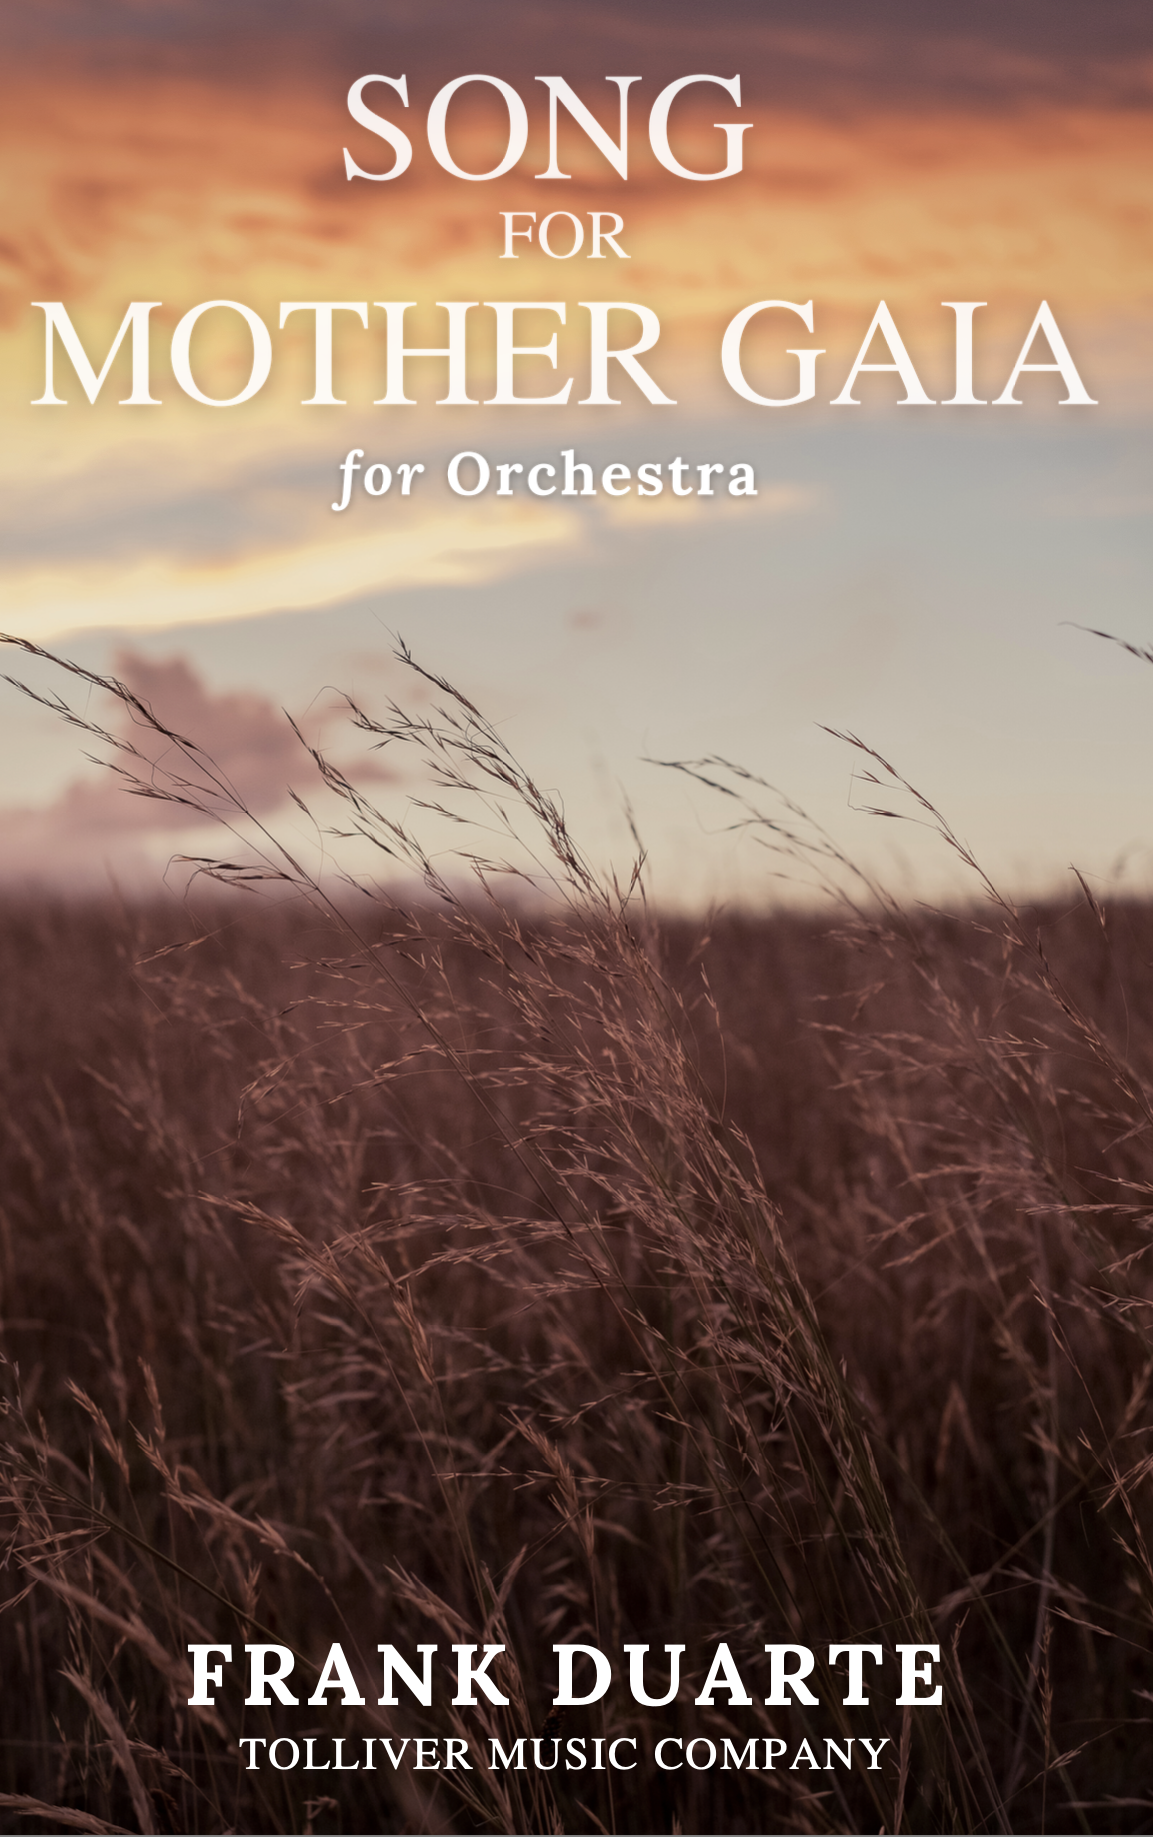 Song For Mother Gaia (Orchestra Version) by Frank Duarte